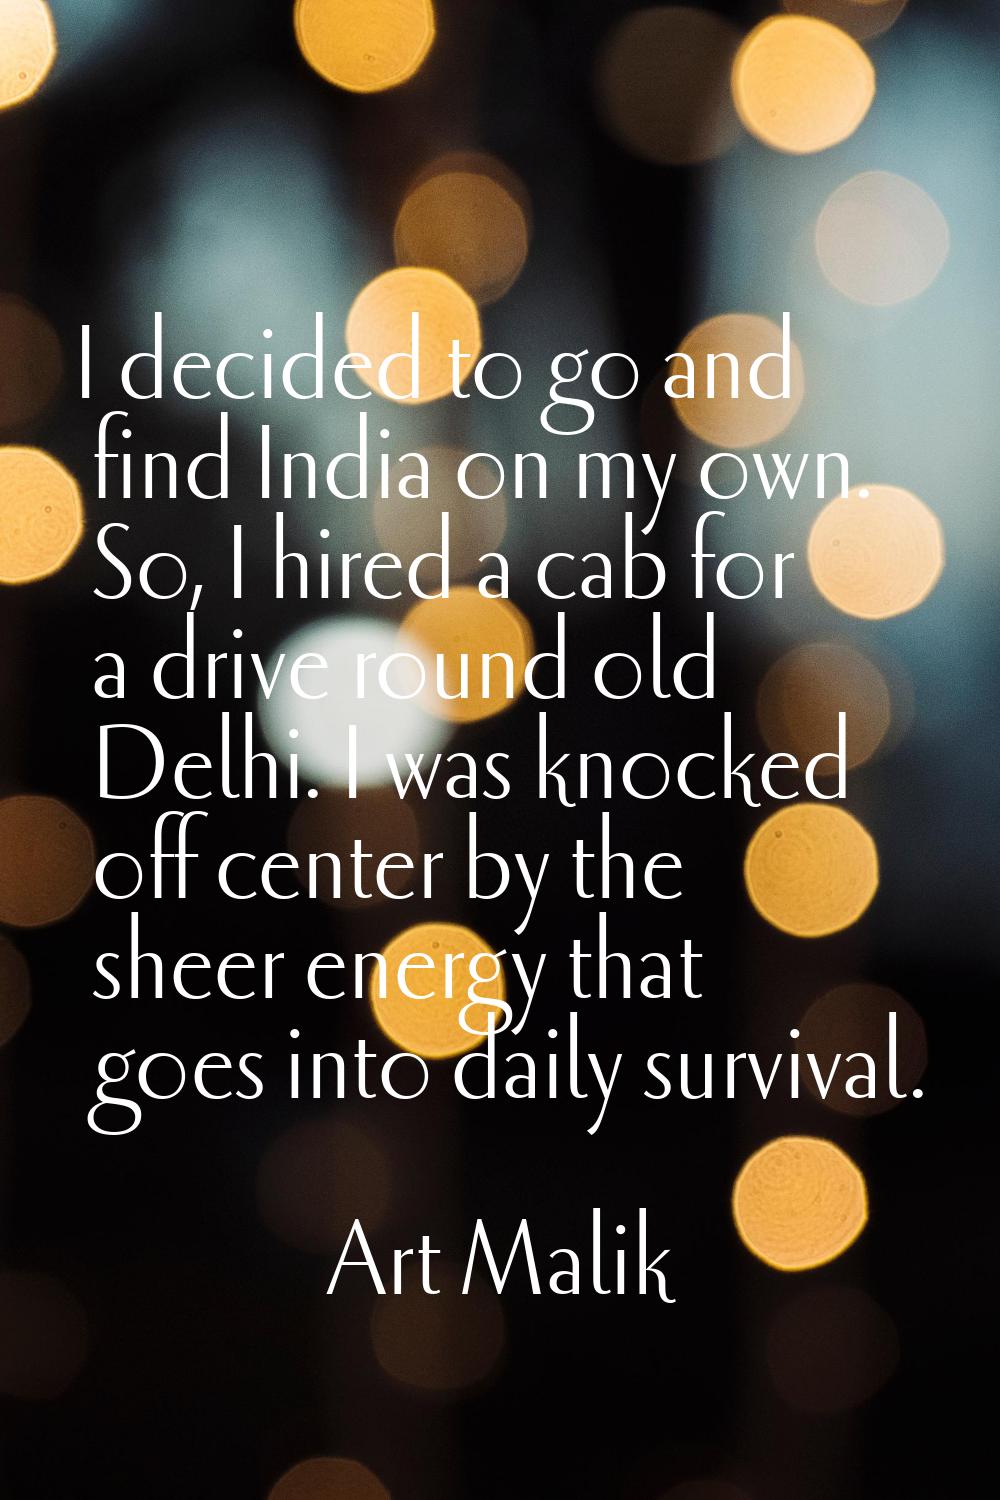 I decided to go and find India on my own. So, I hired a cab for a drive round old Delhi. I was knoc